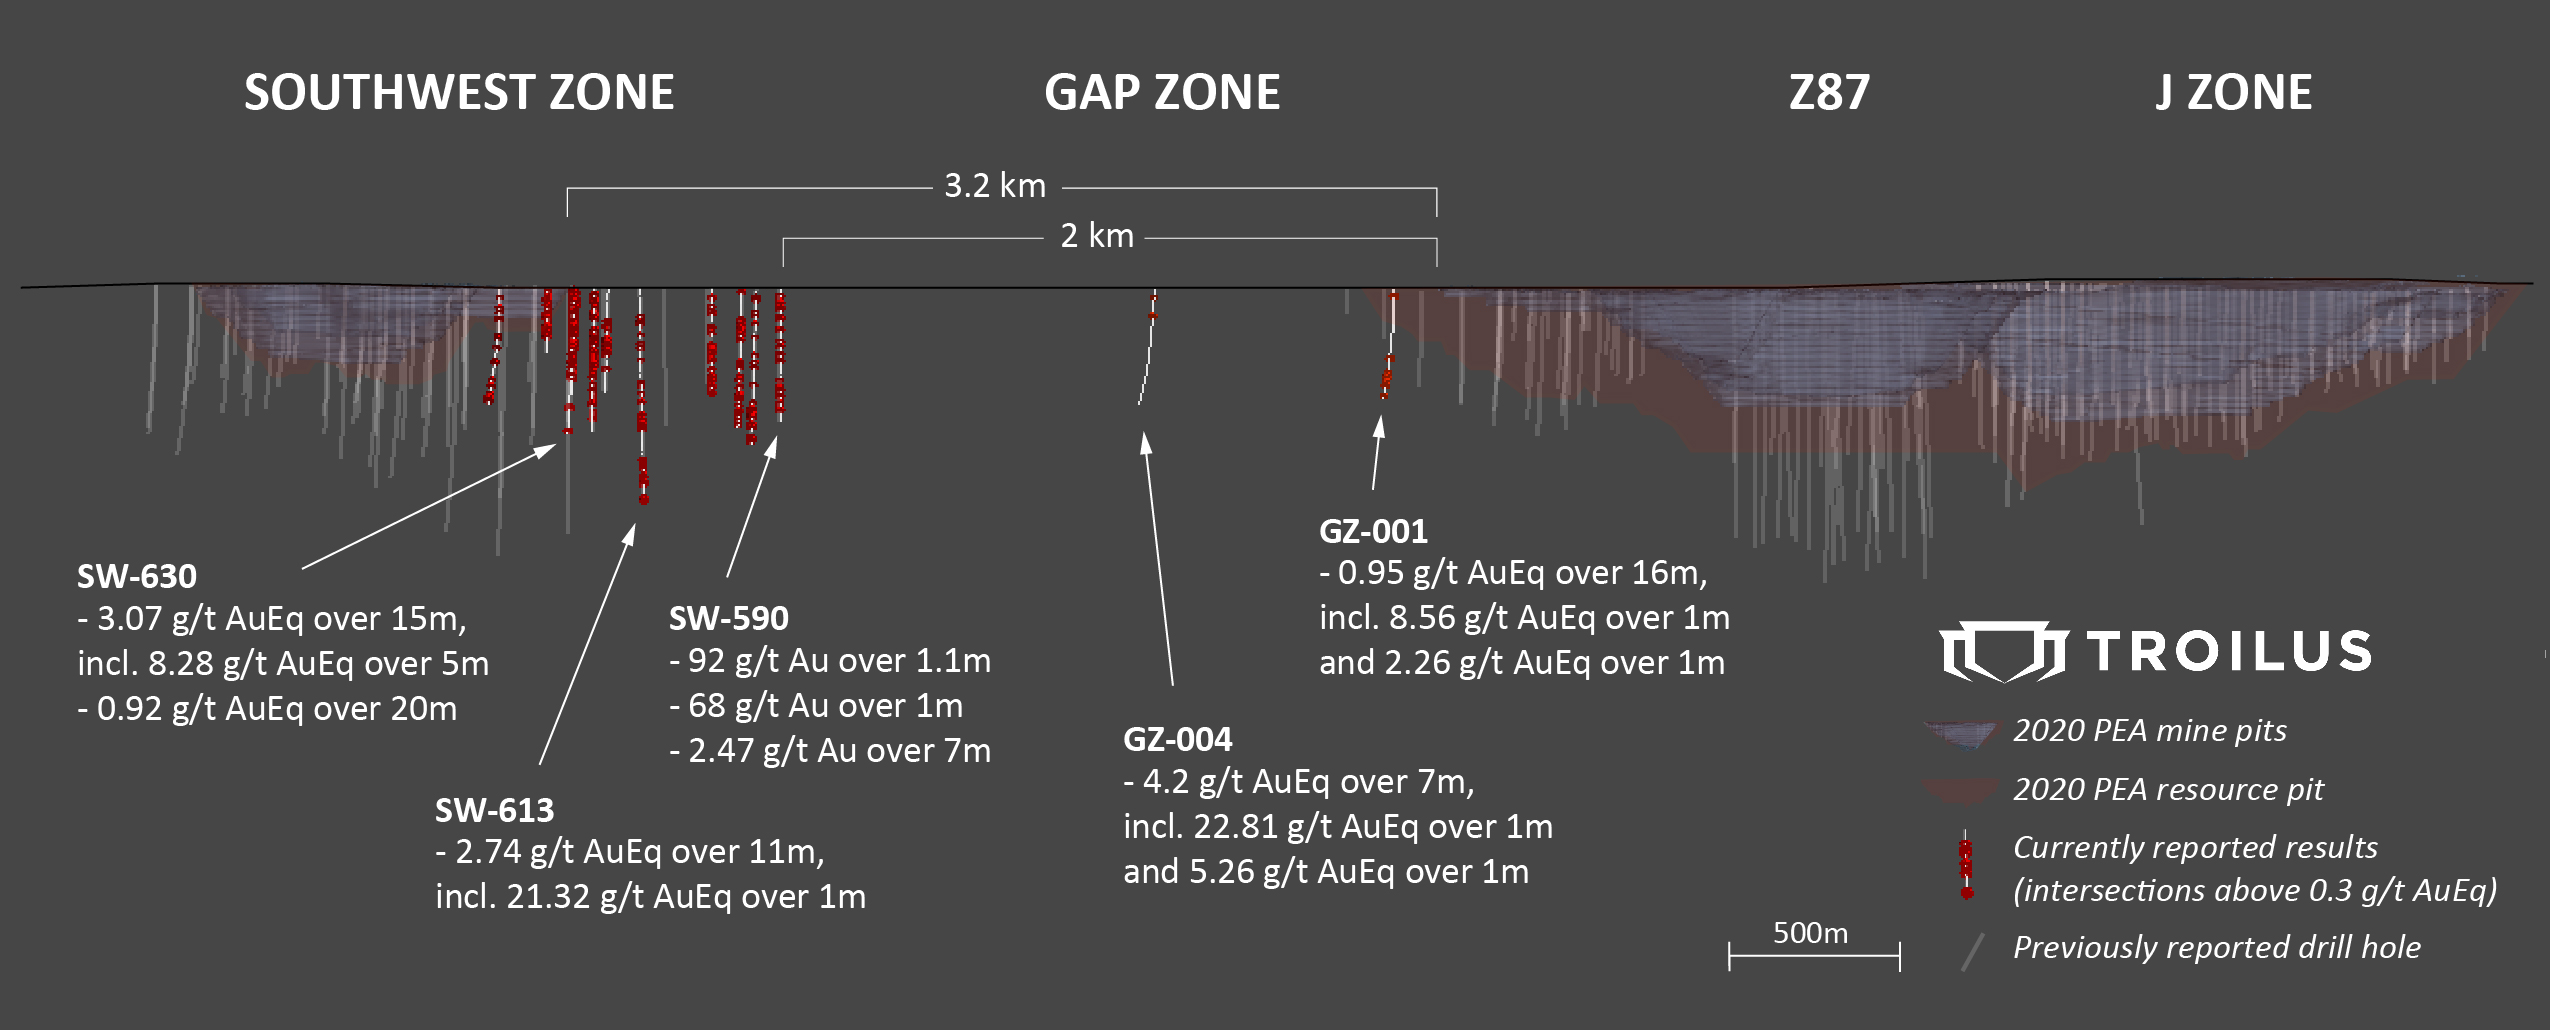 Figure 2: Longitudinal Section Facing North-West Showing Intervals Above 0.3 g/t AuEq on Currently Reported Drill Holes